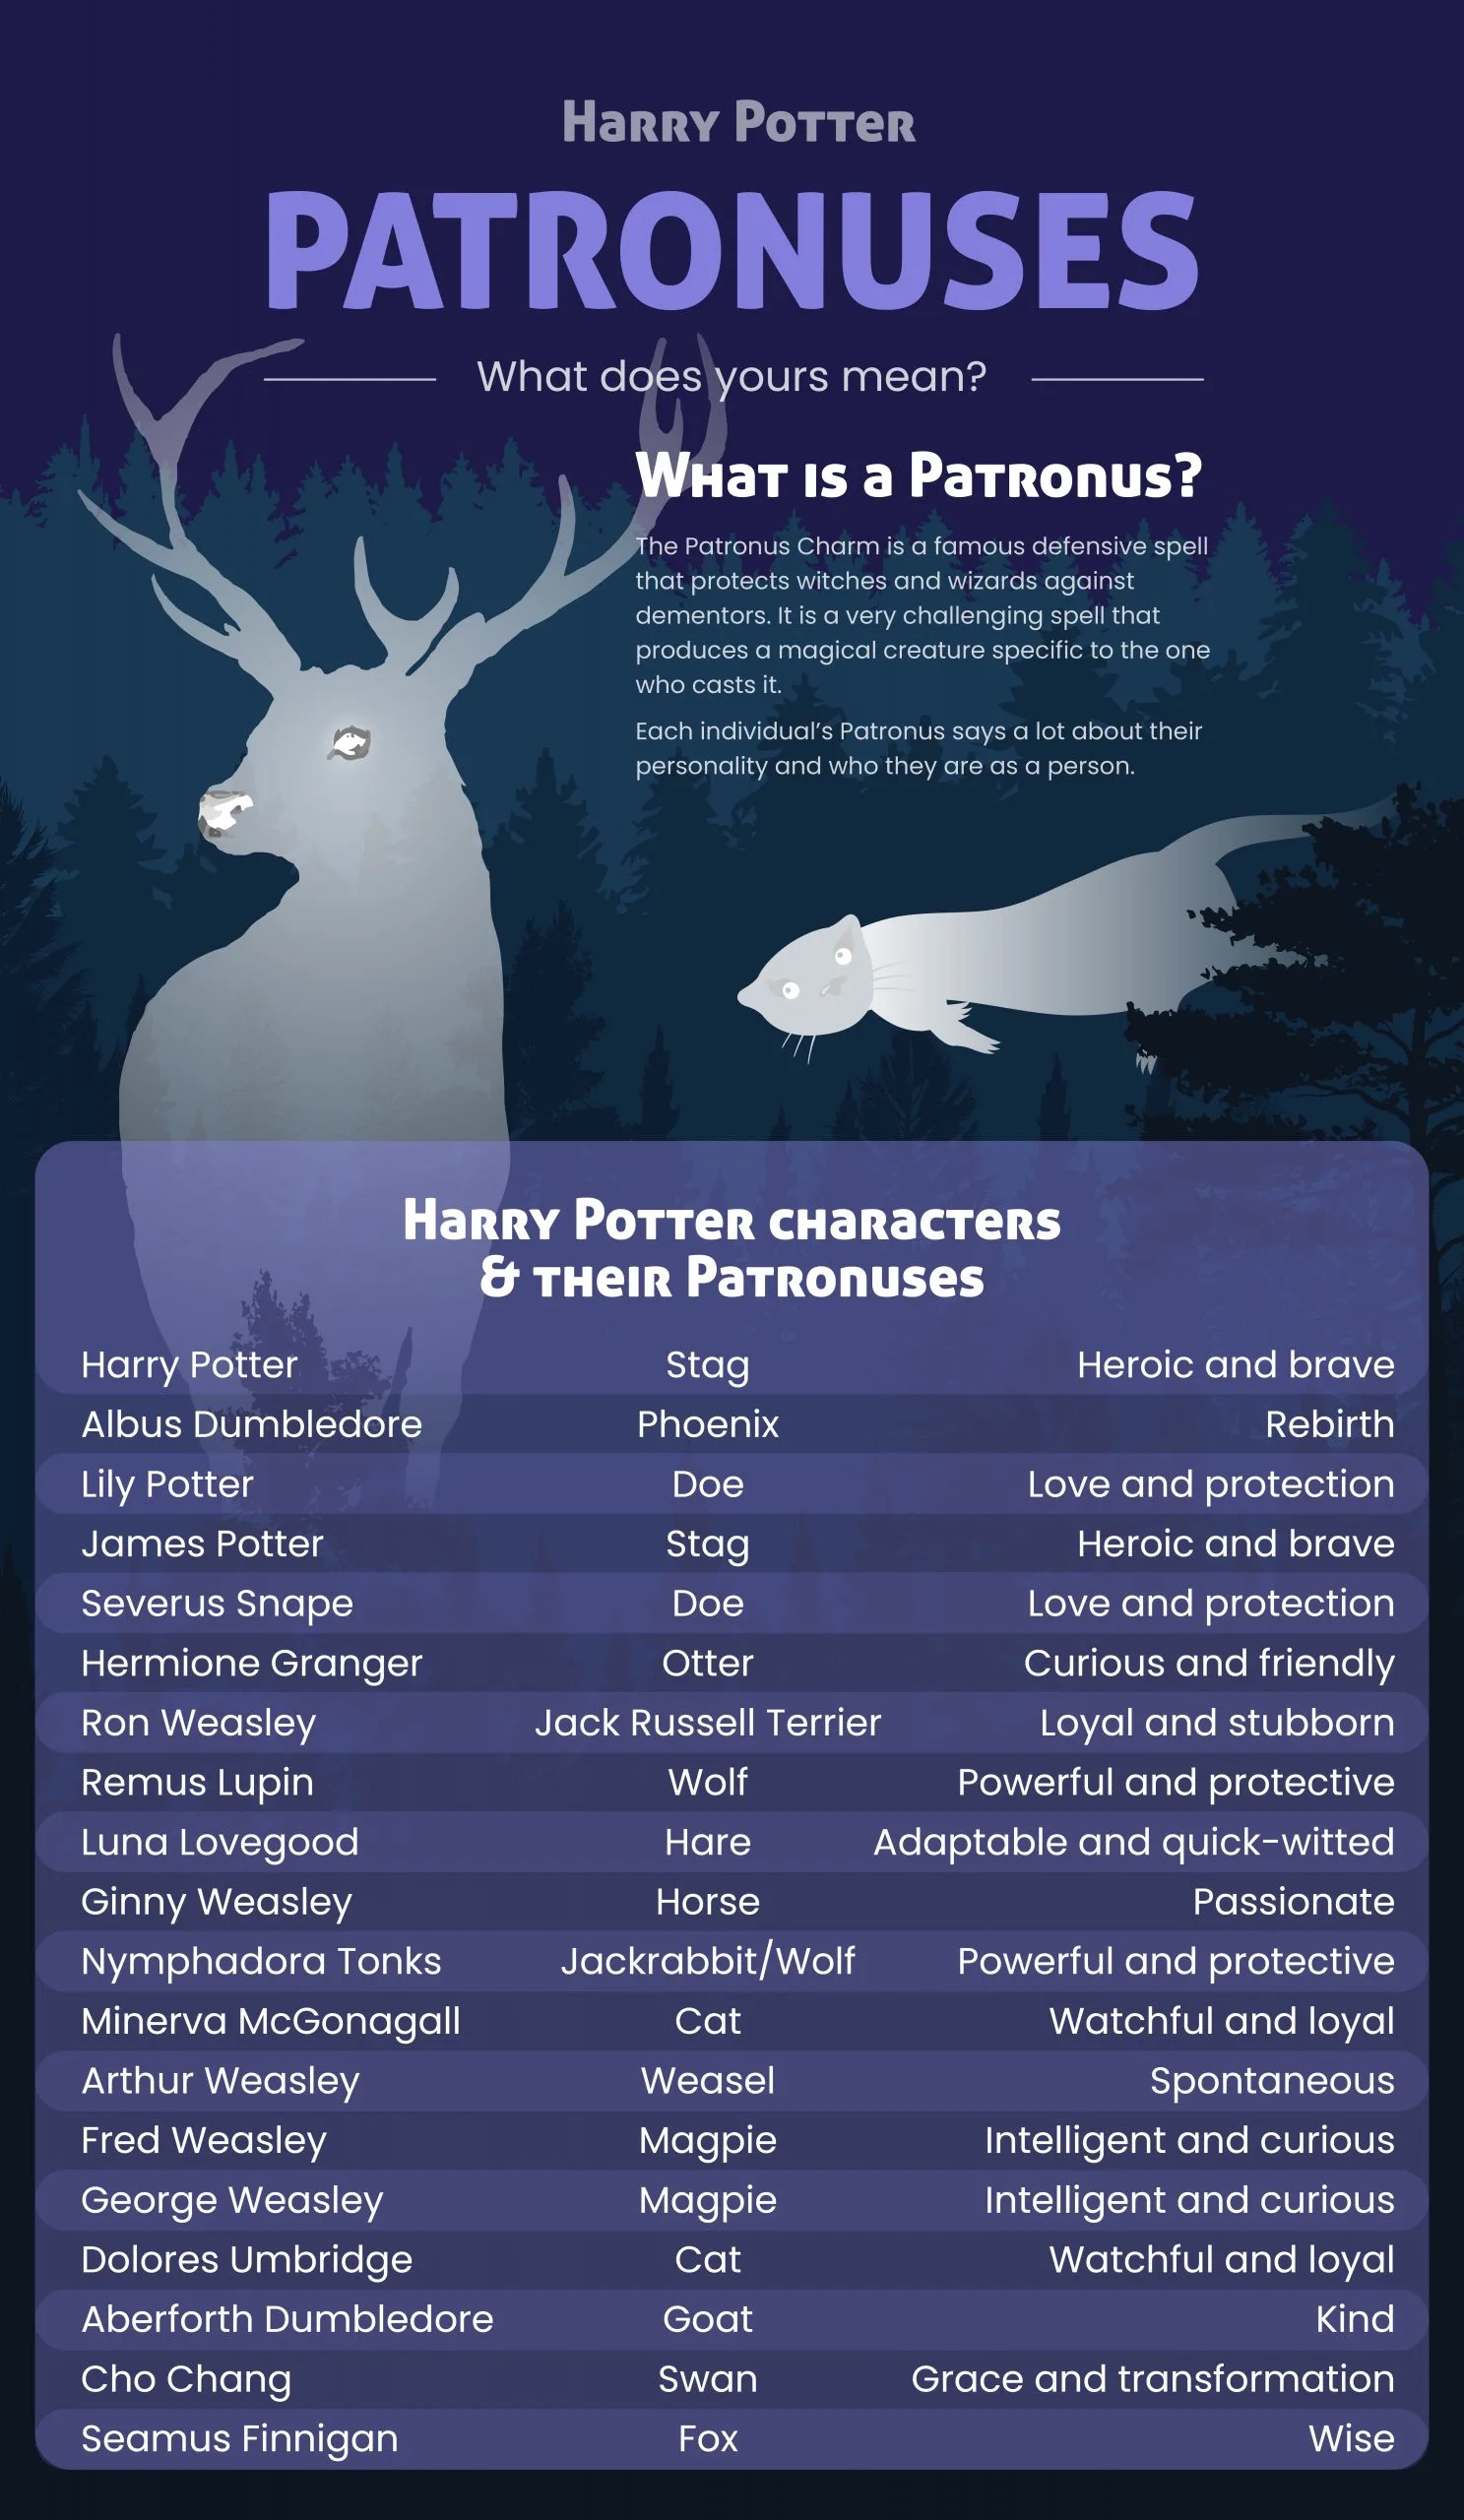 Harry Potter Patronuses and Meanings